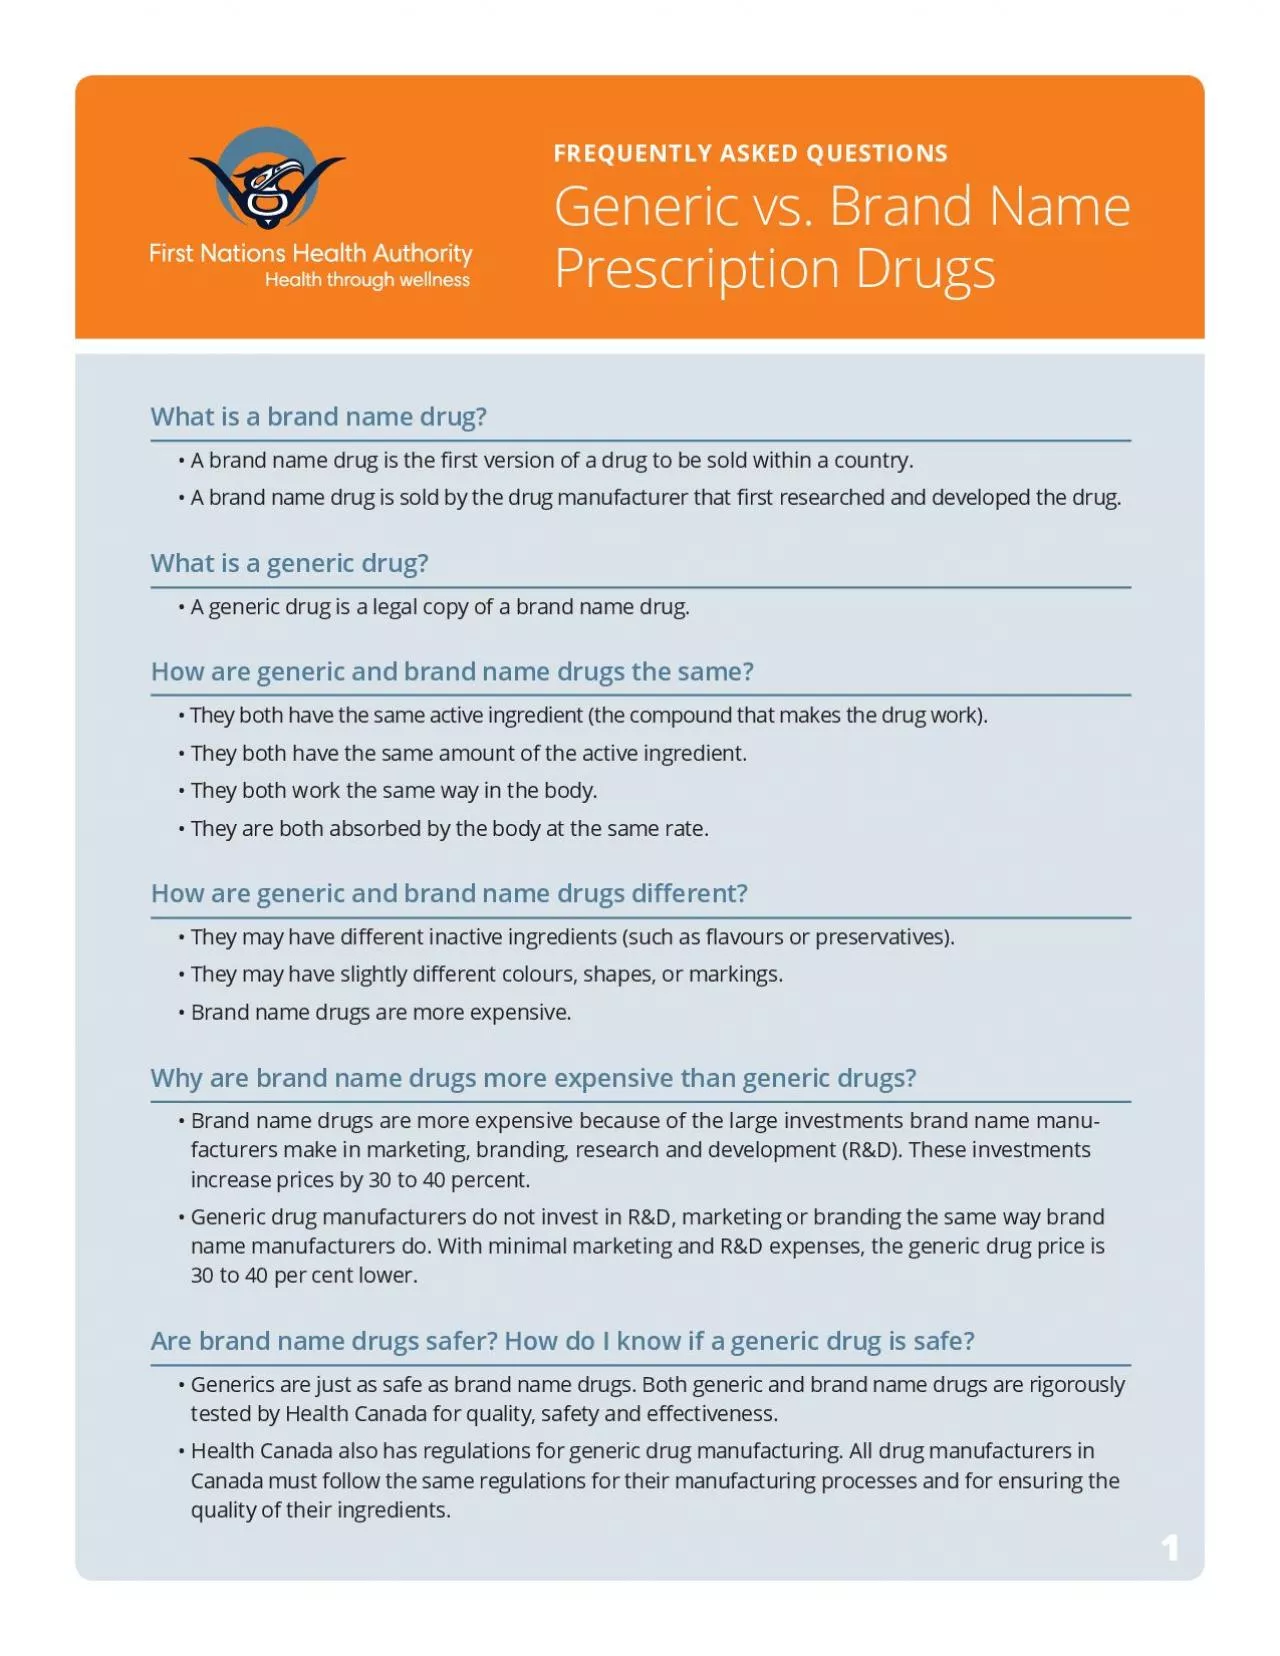 FREQUENTLY ASKED QUESTIONSGeneric vs Brand NamePrescription Drugs